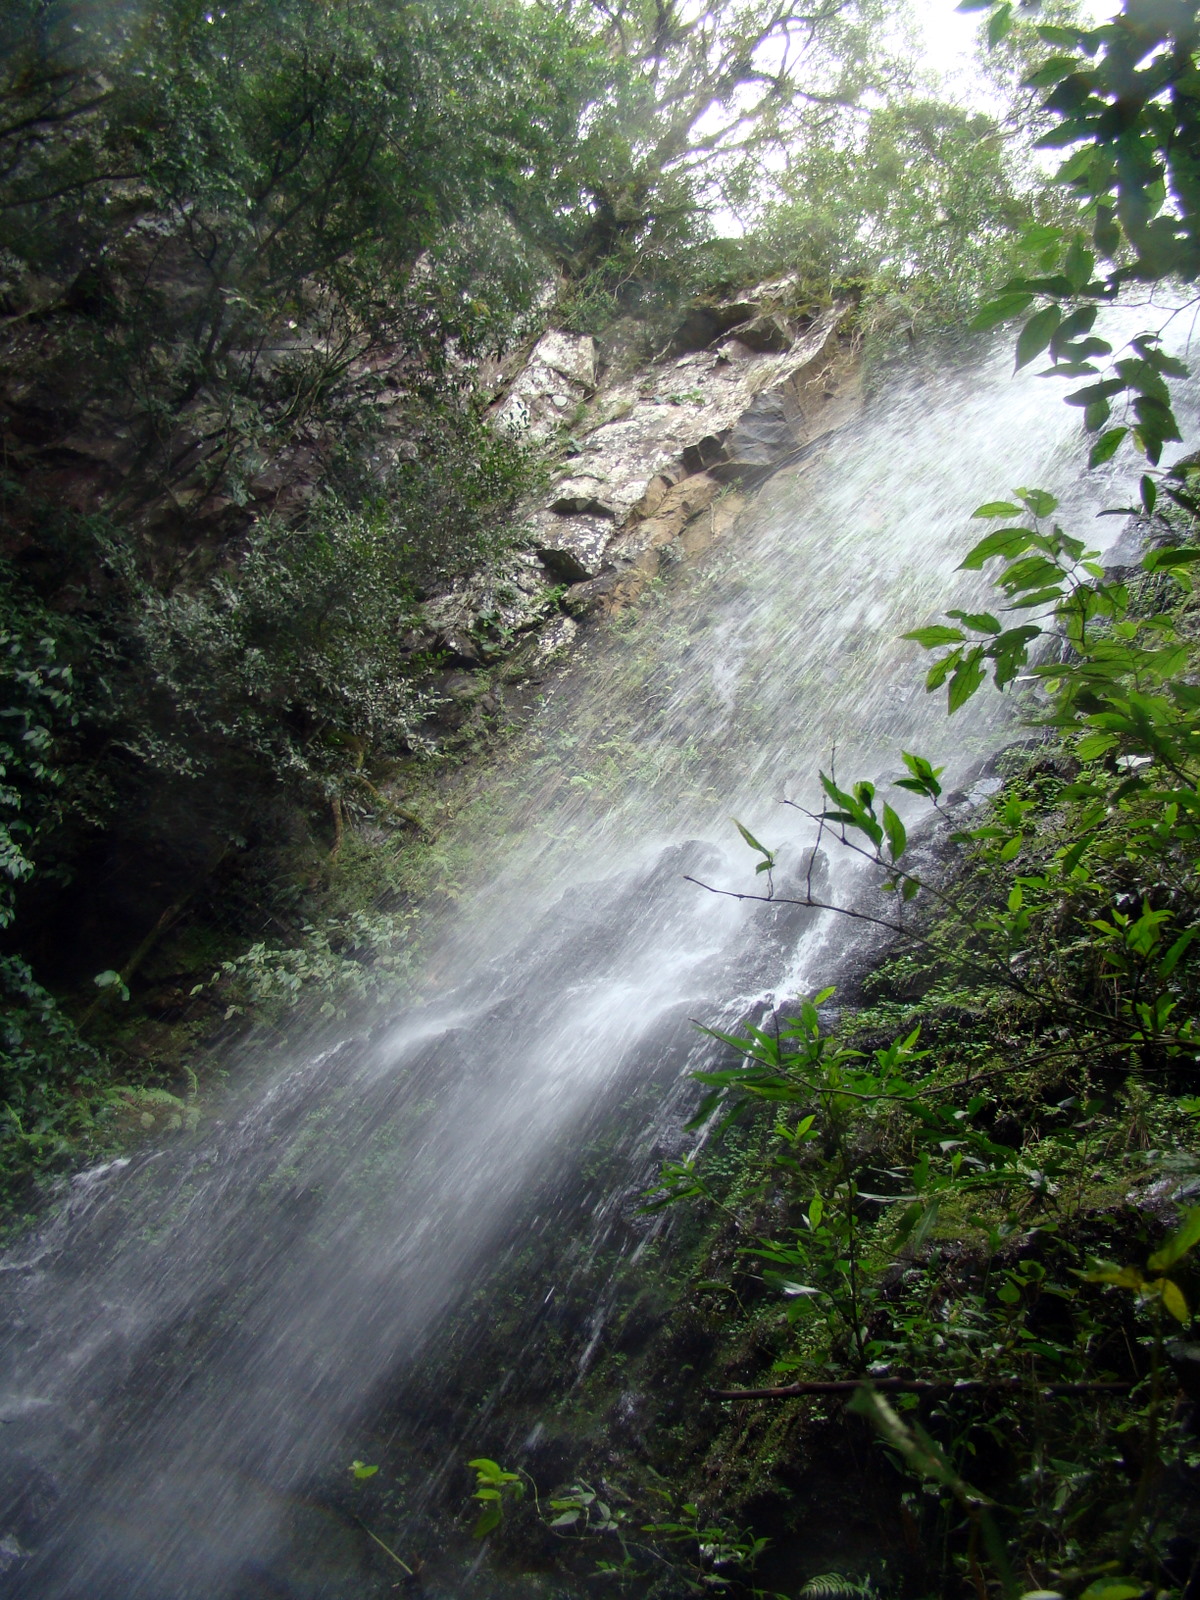 water pours from a large waterfall into a green forest